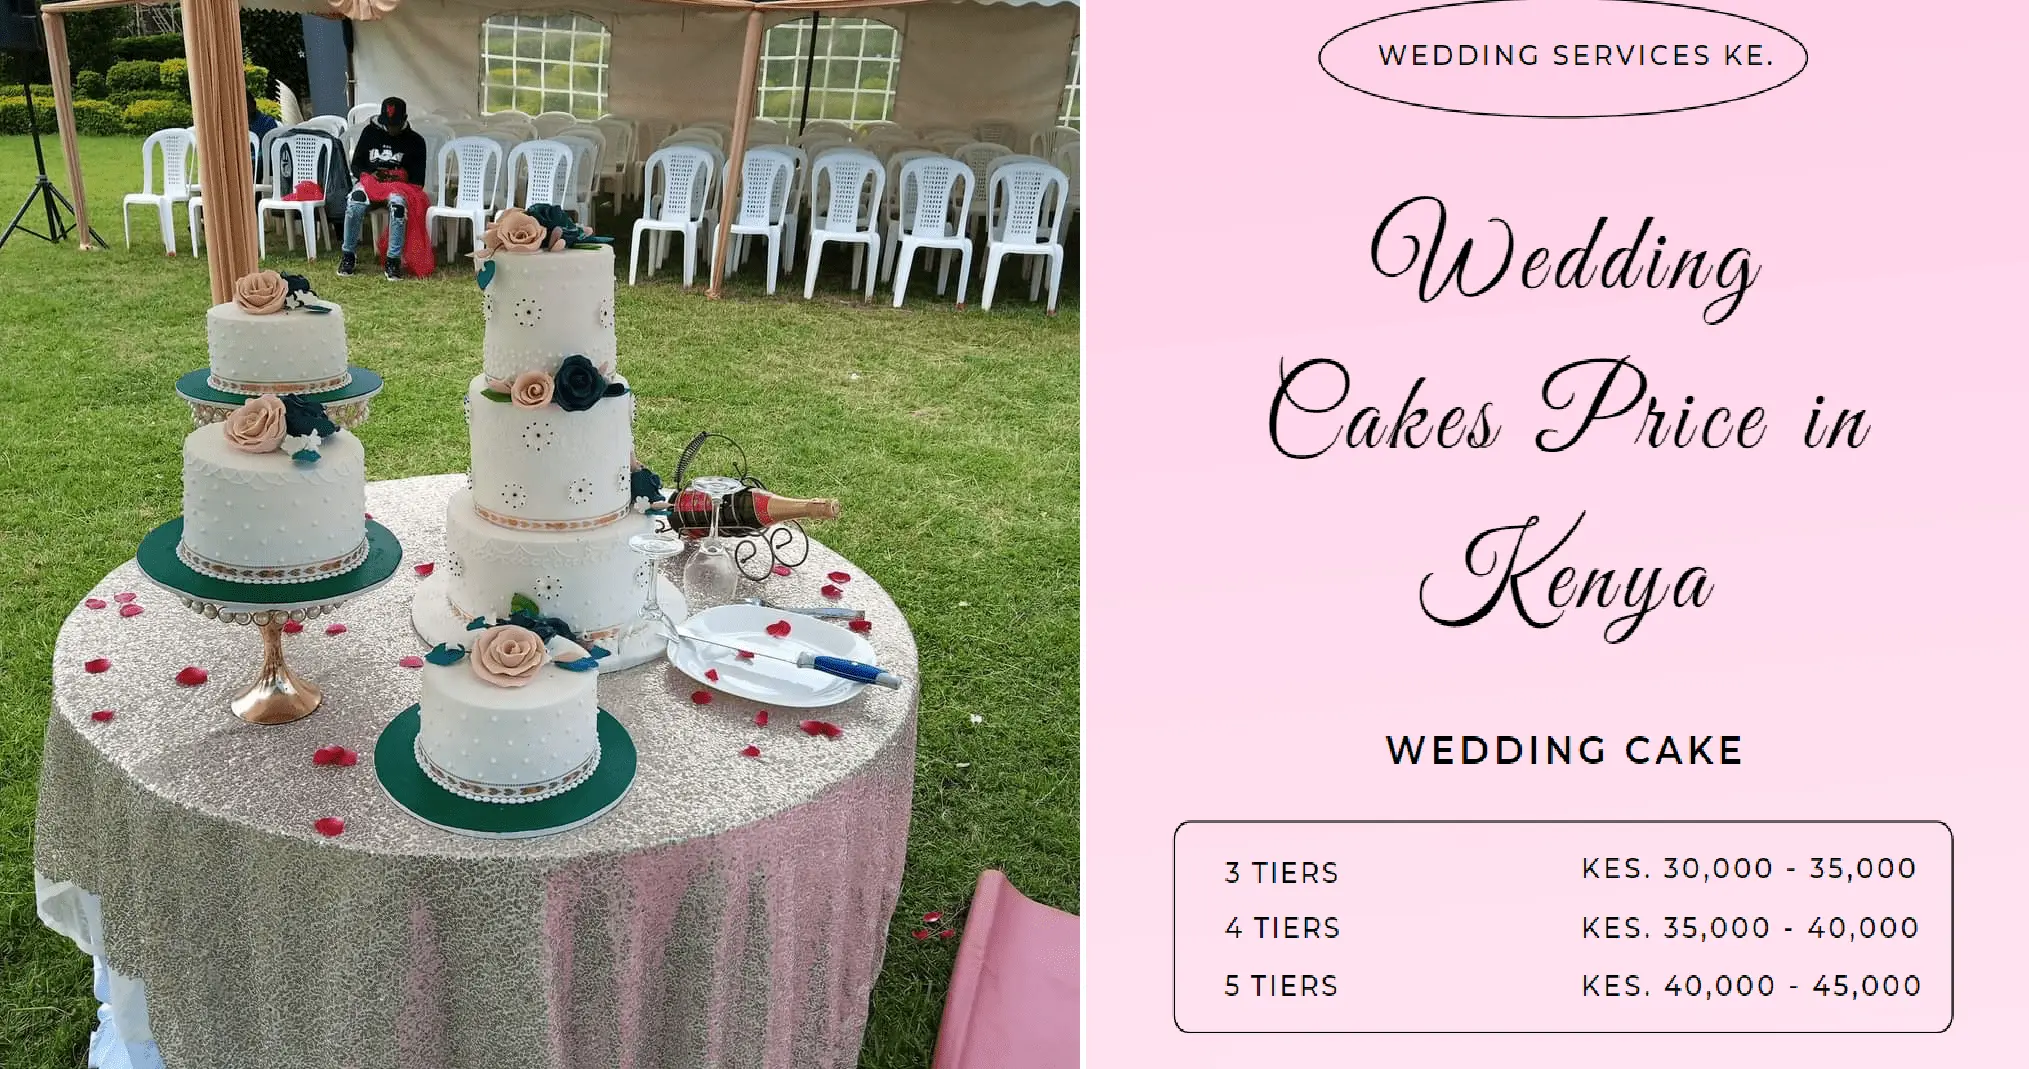 Wedding cake and its cost and price in Kenya image